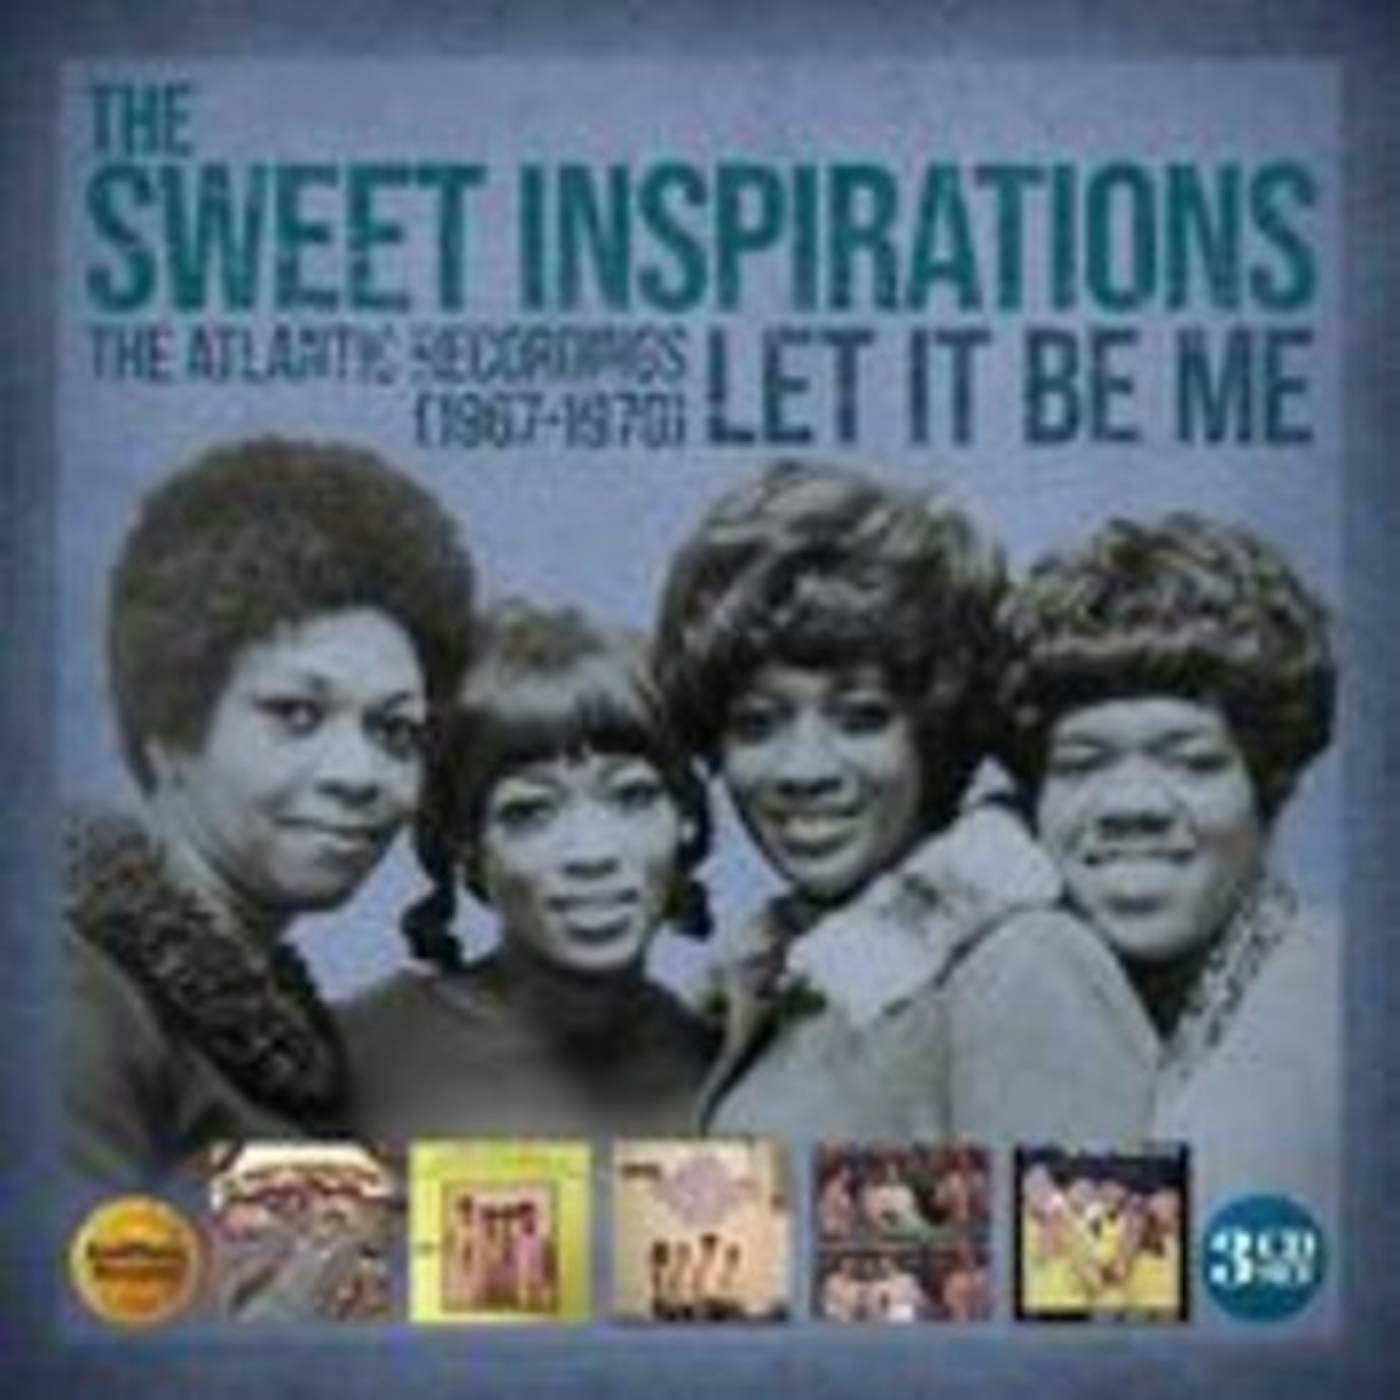 The Sweet Inspirations LET IT BE ME: THE ATLANTIC RECORDINGS 1967-1970 CD